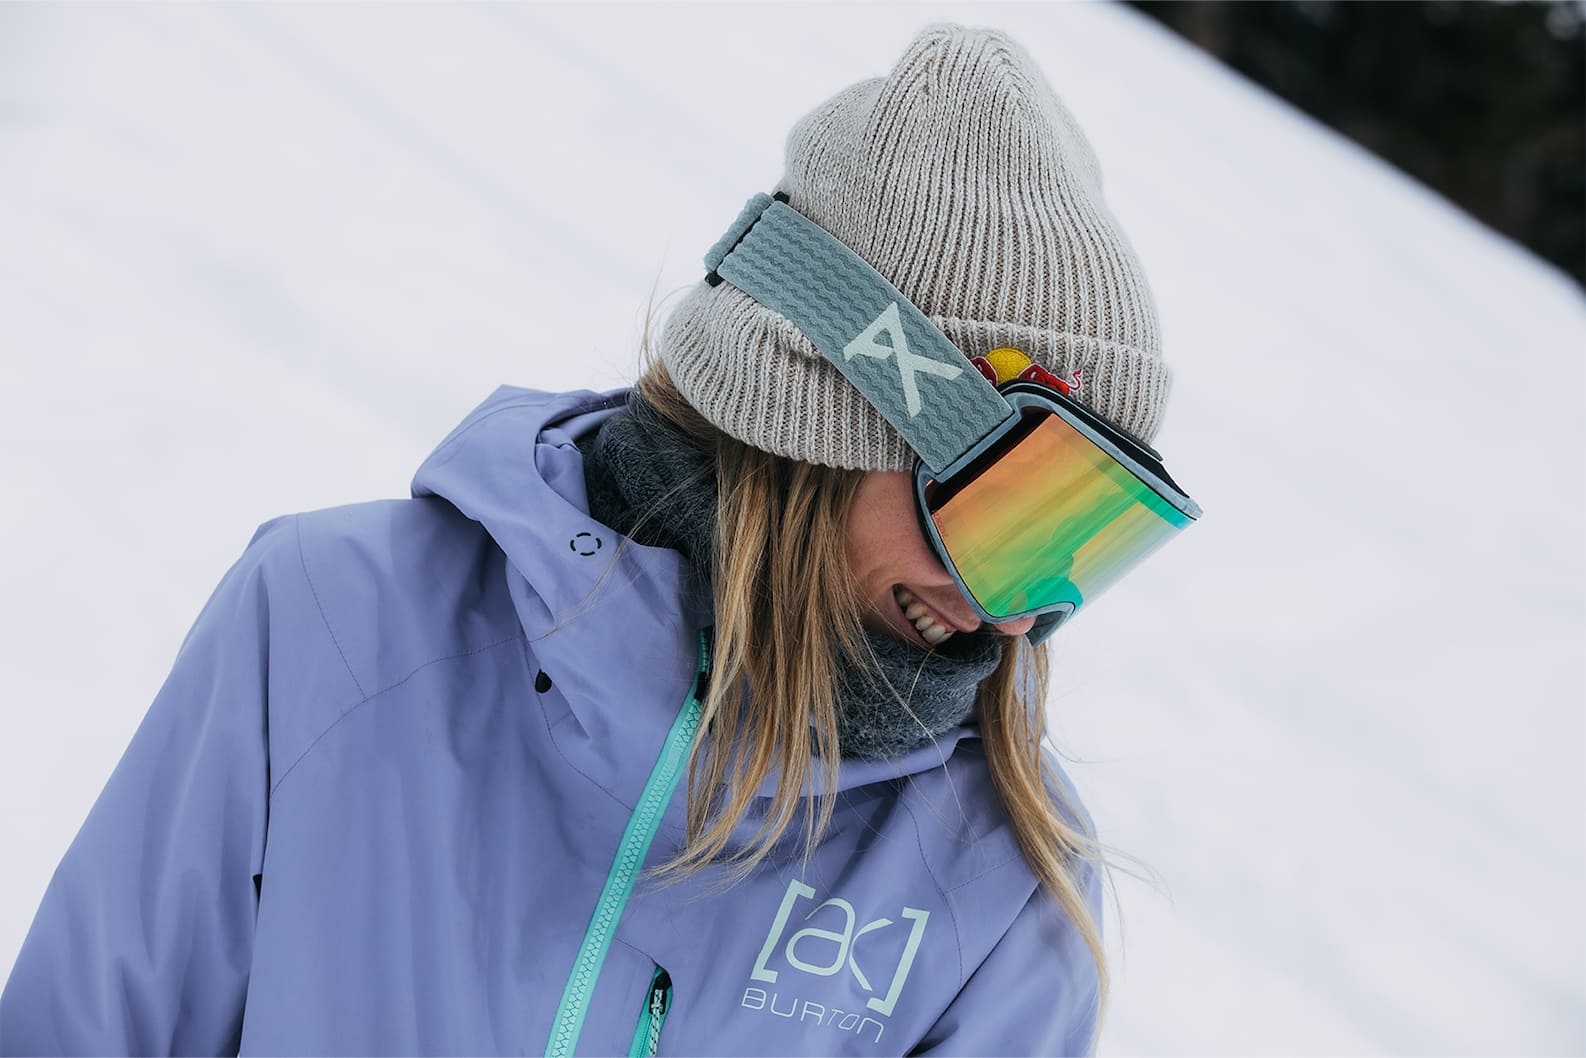 Goggles 101: The Official Anon Lens Guide | Burton Snowboards